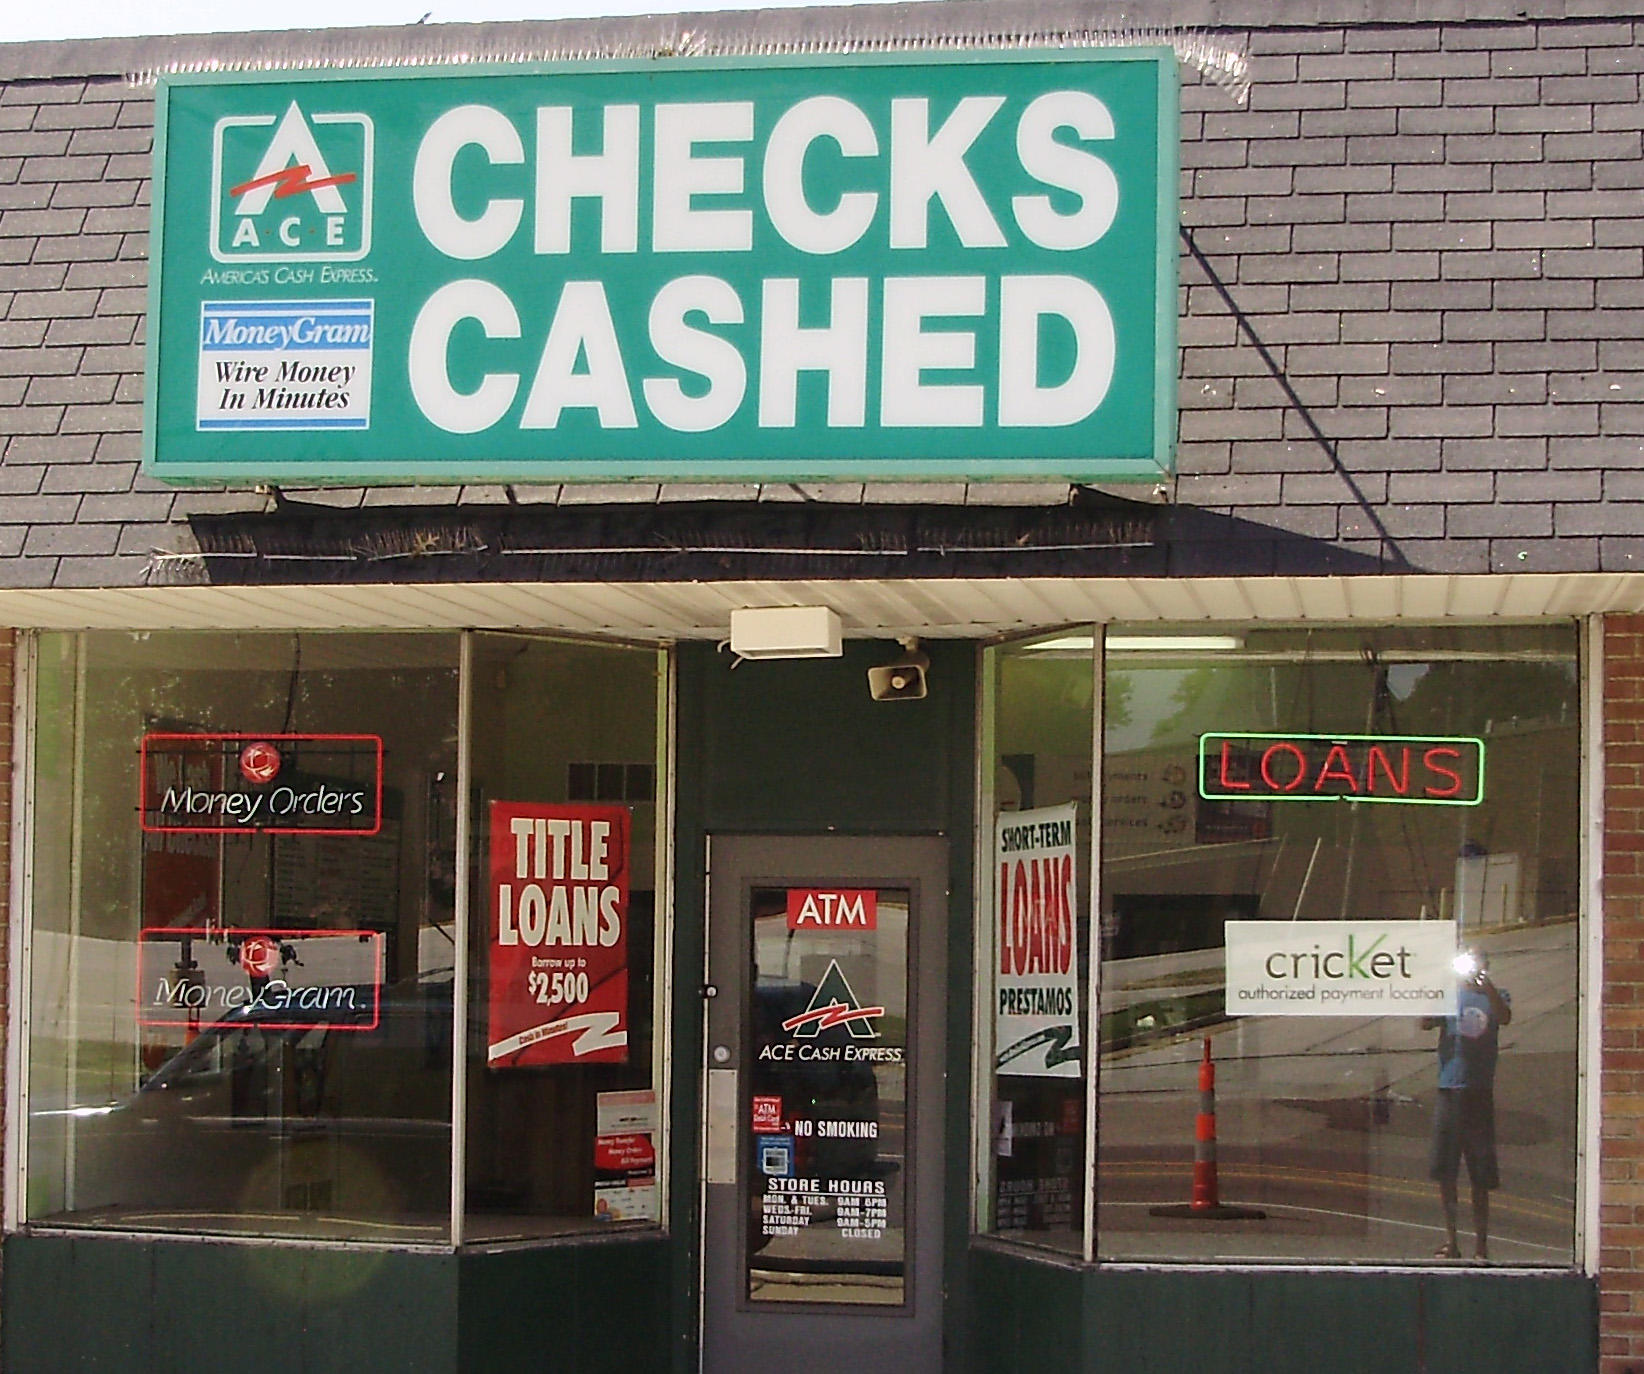 payday loans in Ohio